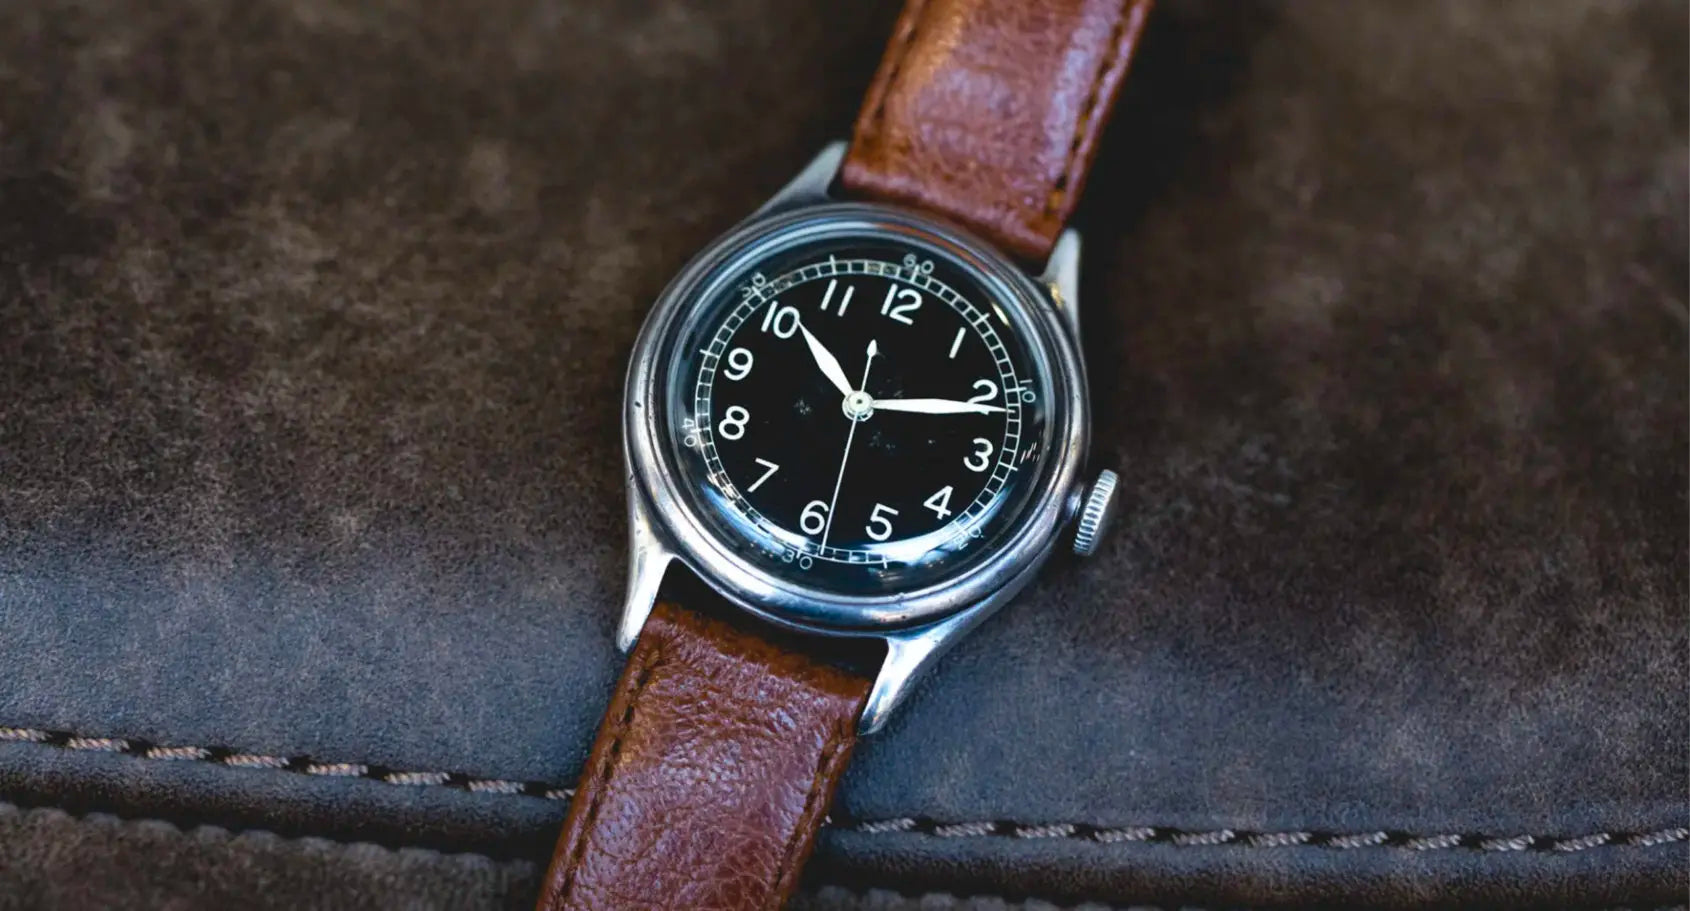 Everest Journal History & Significance of the Type A-11 Military Watch